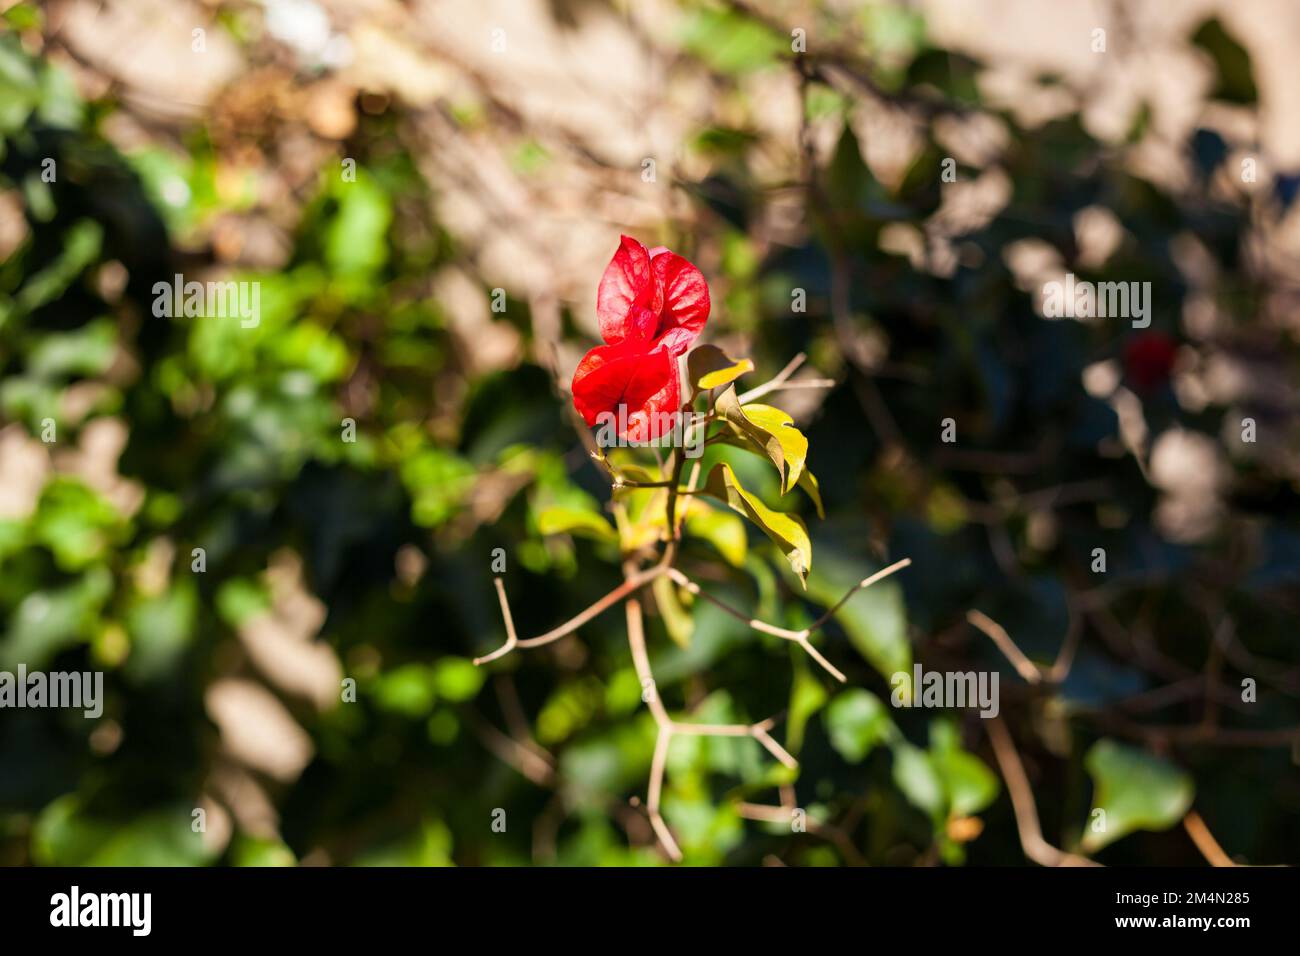 Flowers of red bougainvillea.Nature photography Stock Photo